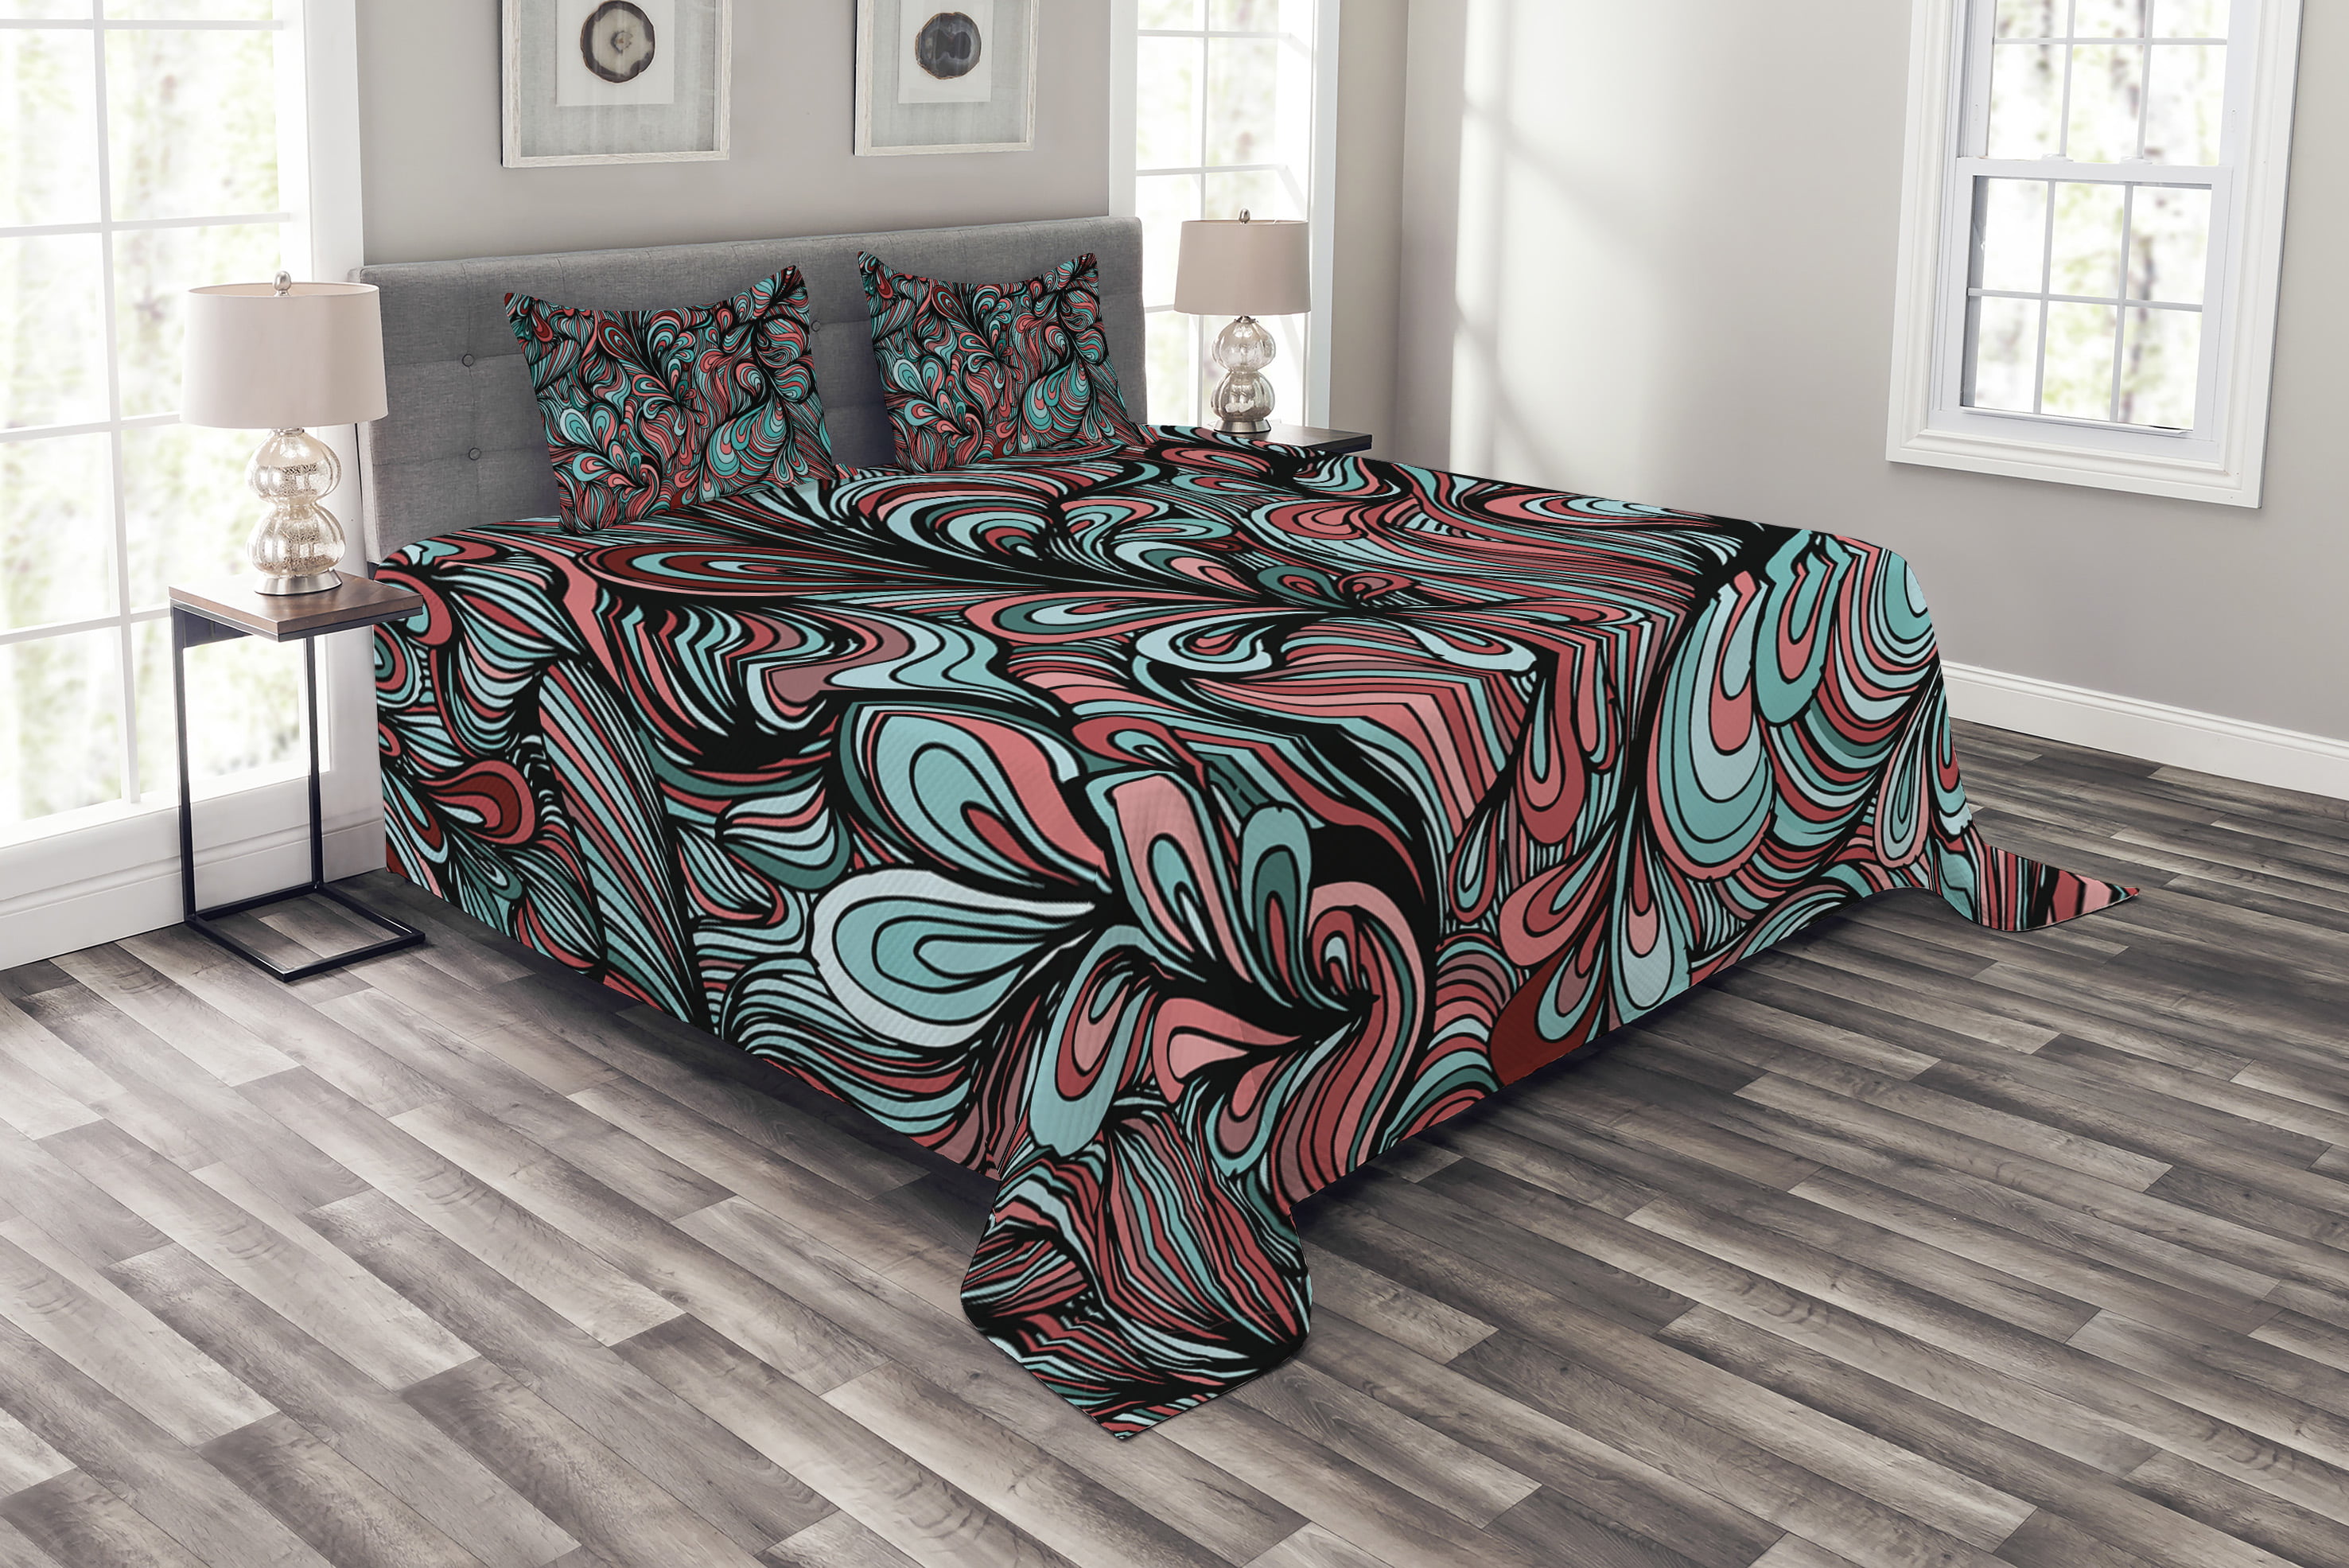 Art Bedspread Set Queen Size, Absurd Shapes with Dim Colors in a Grunge ...